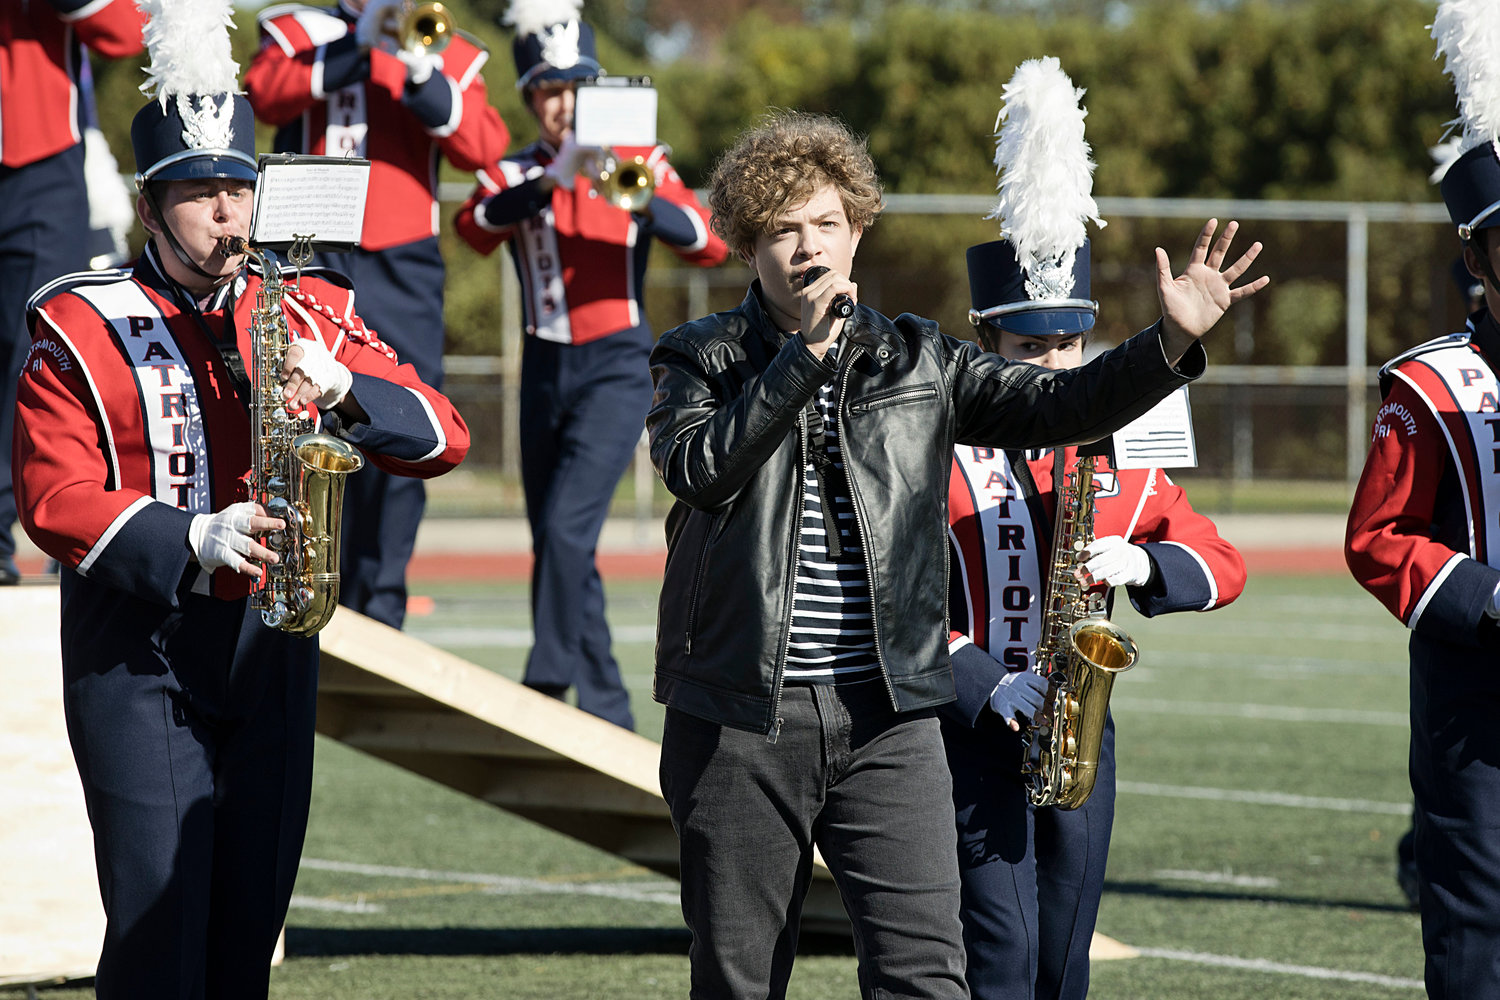 Sophomore Dillion Fesmire waves to the crowd after performing as “Elvis” with the Portsmouth High School Marching Band on Saturday.